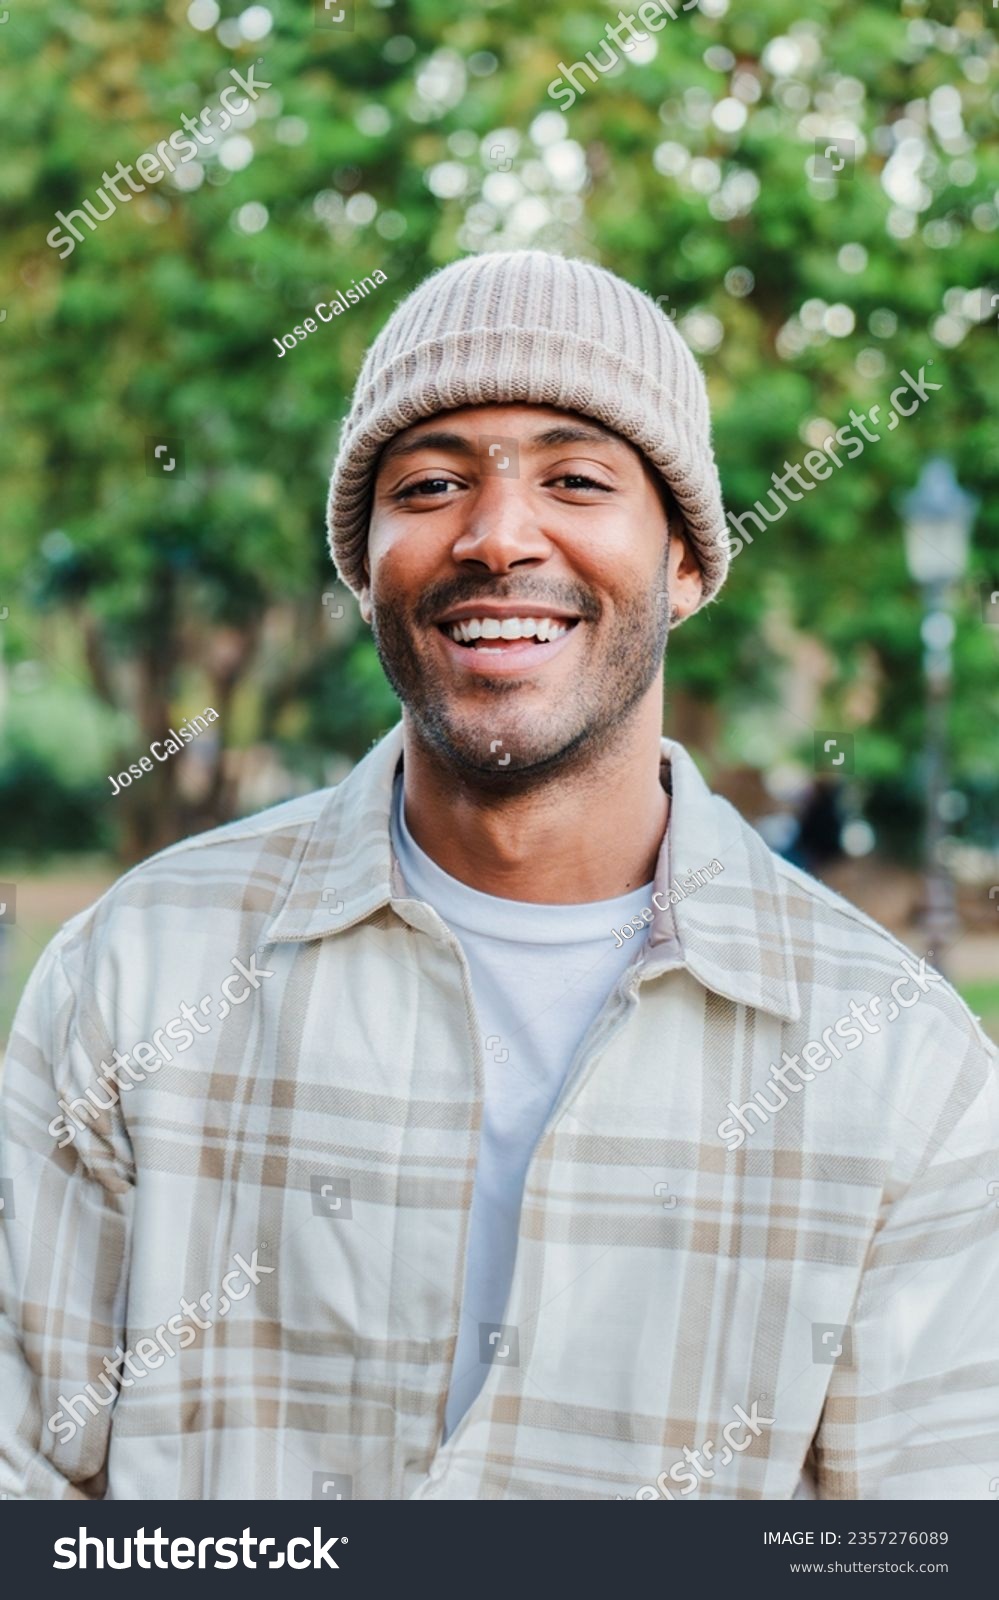 Vertical close up portrait of young hispanic man with a beanie hat smiling and looking at camera outdoors. Front view of latin happy guy standing at park with carefree attitude. Lifestyle concept #2357276089